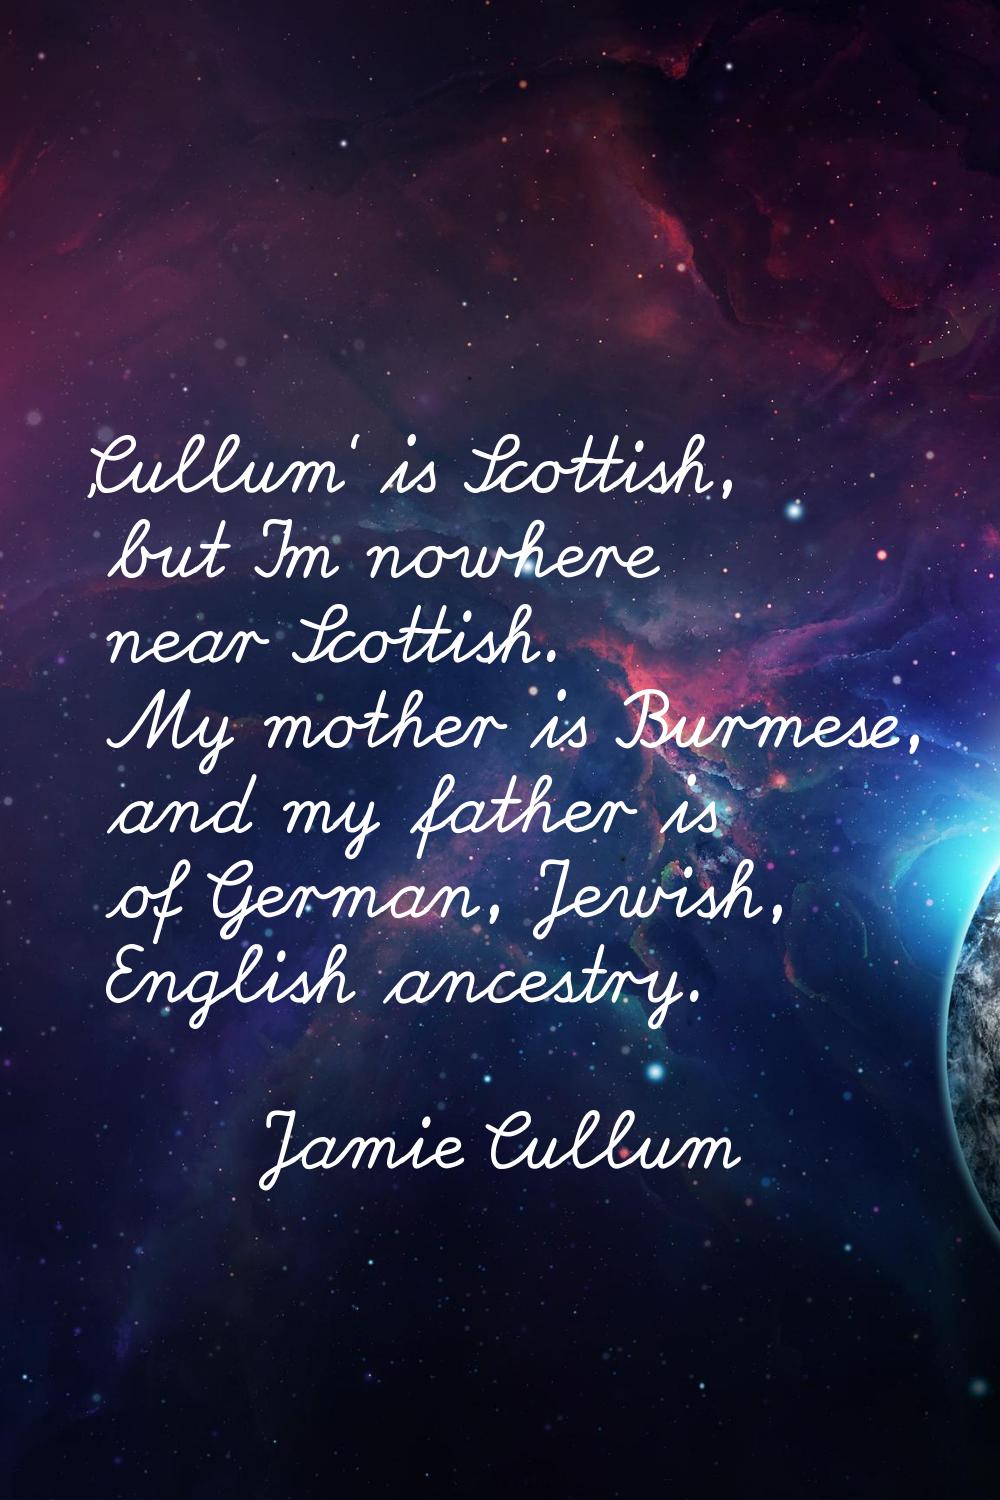 'Cullum' is Scottish, but I'm nowhere near Scottish. My mother is Burmese, and my father is of Germ